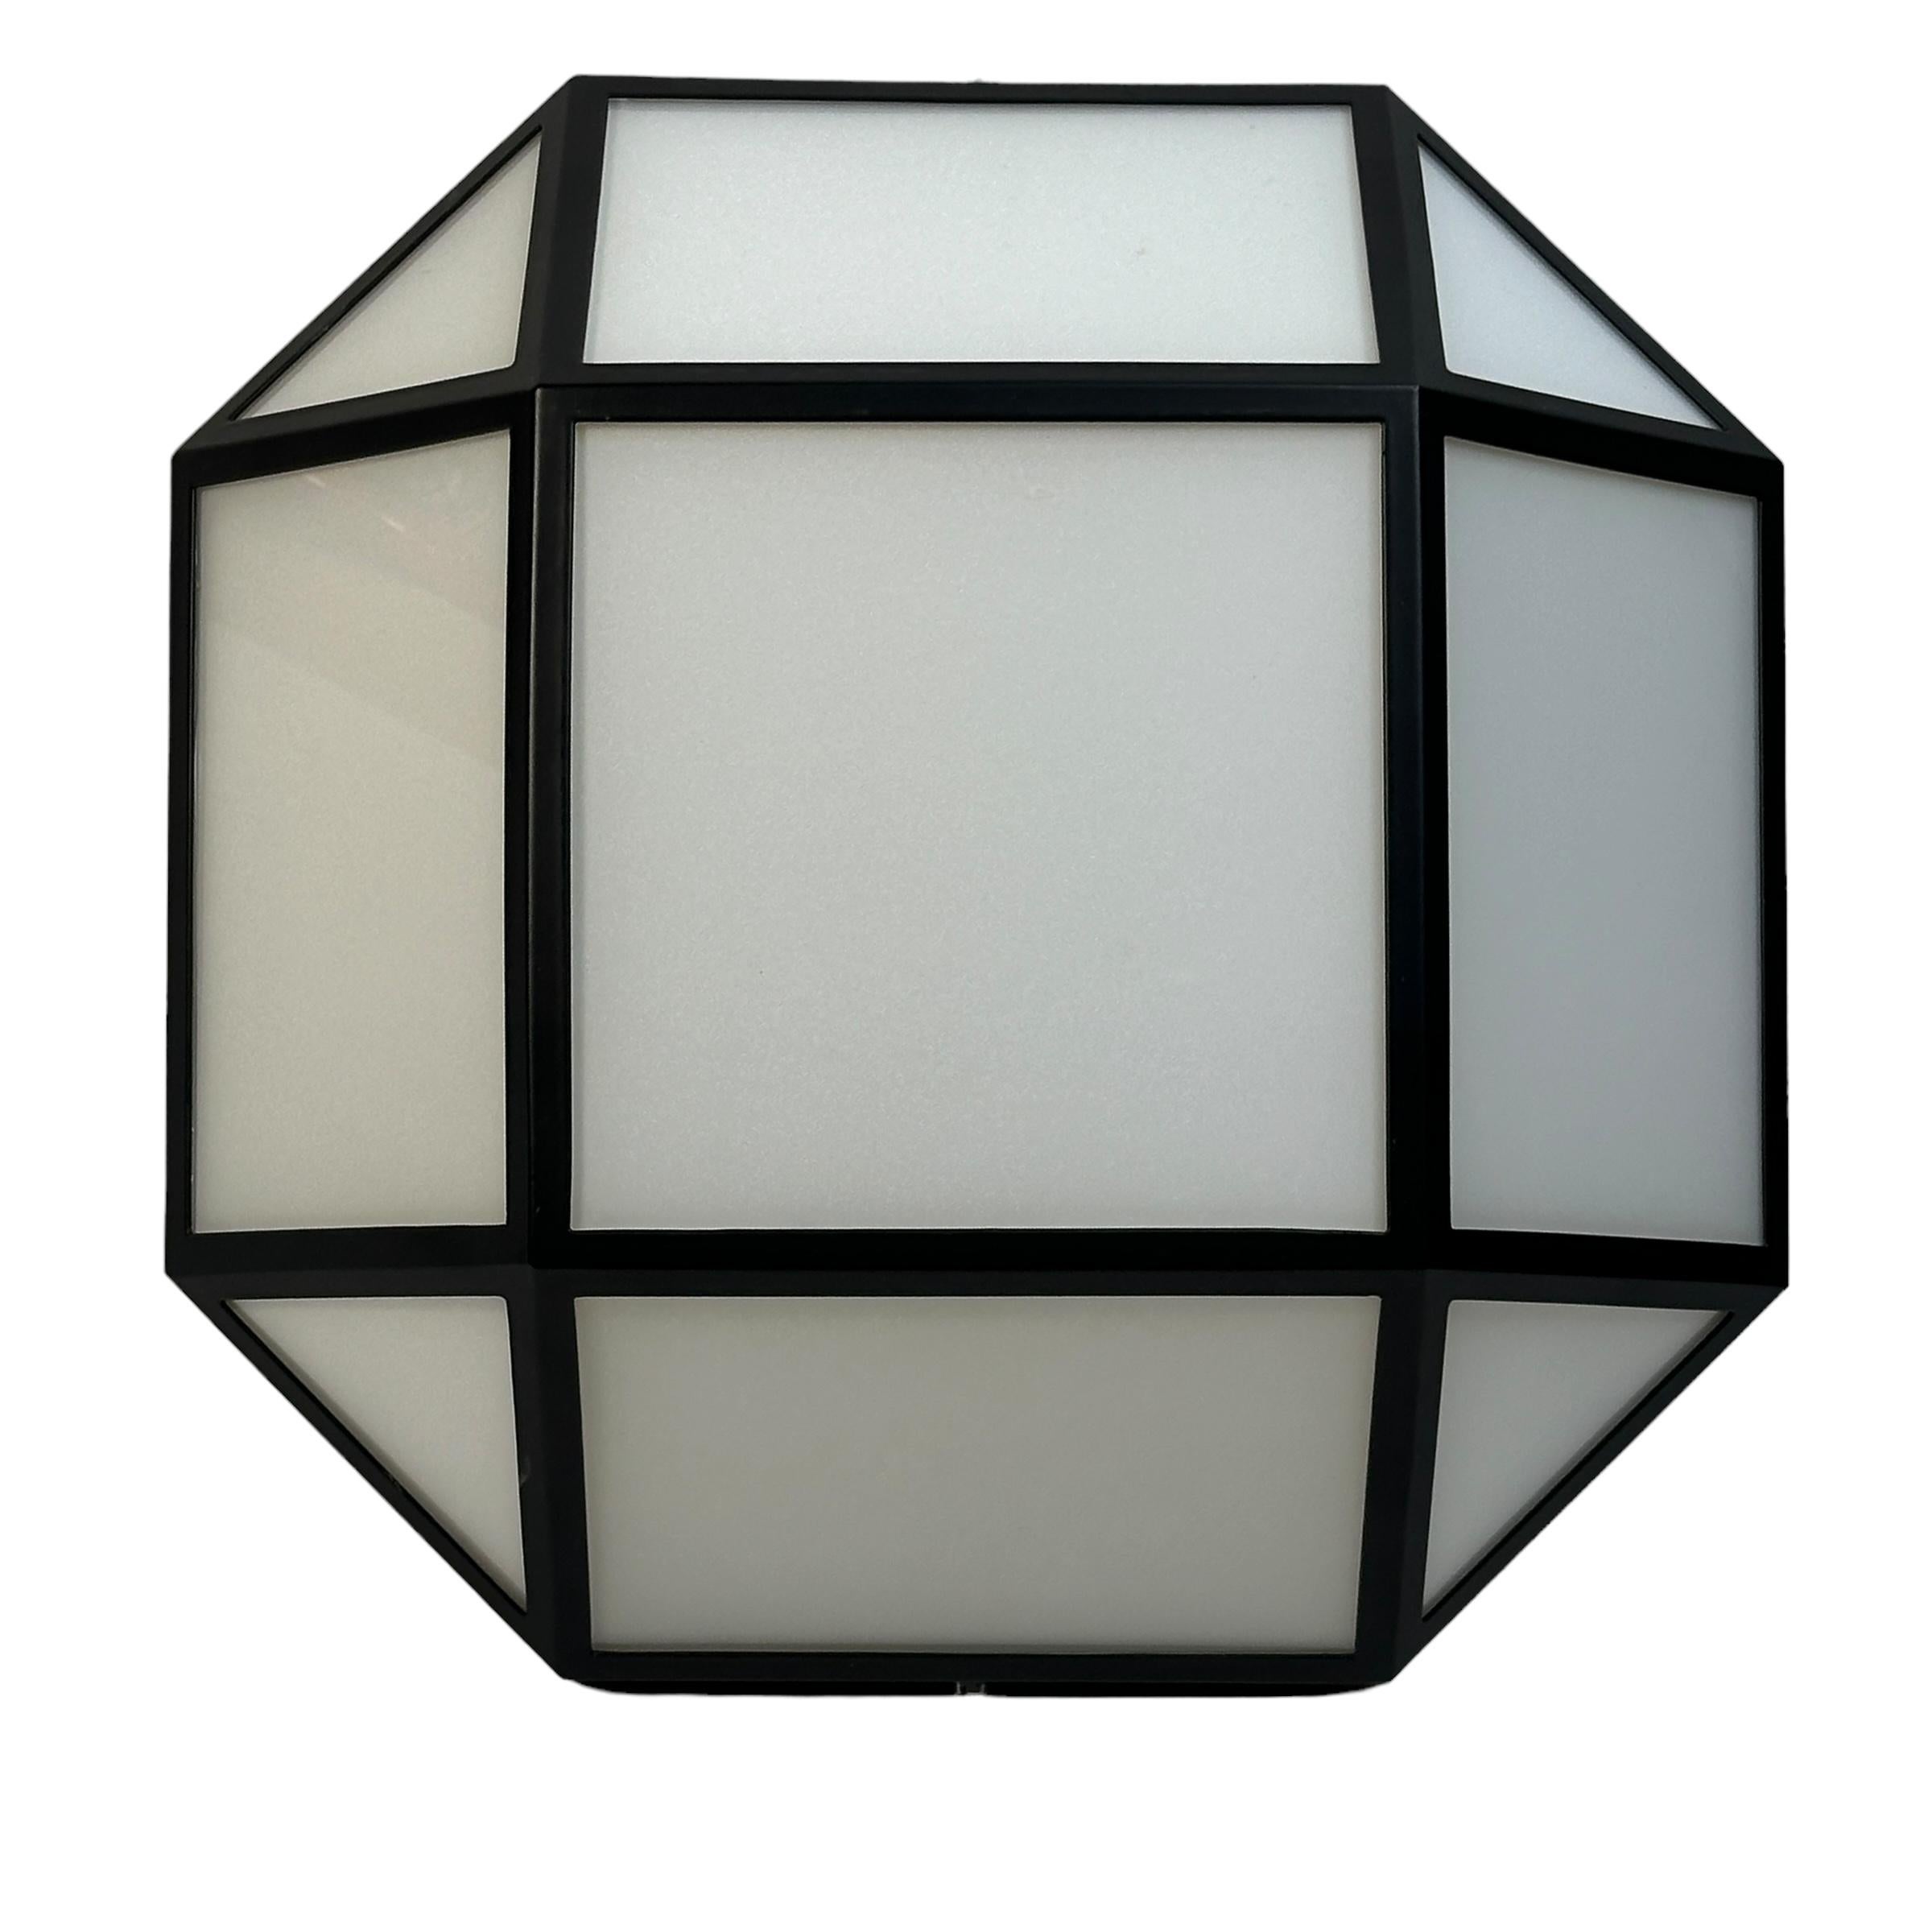 Elegant Austrian modern wall light, with metal caged milk glass and mounted on white lacquered metal base. Manufactured by Eglo Leuchten in the 1980s. This fixture requires three European E14 lightbulbs, up to 40 watts each. If Lightbulbs pictured,